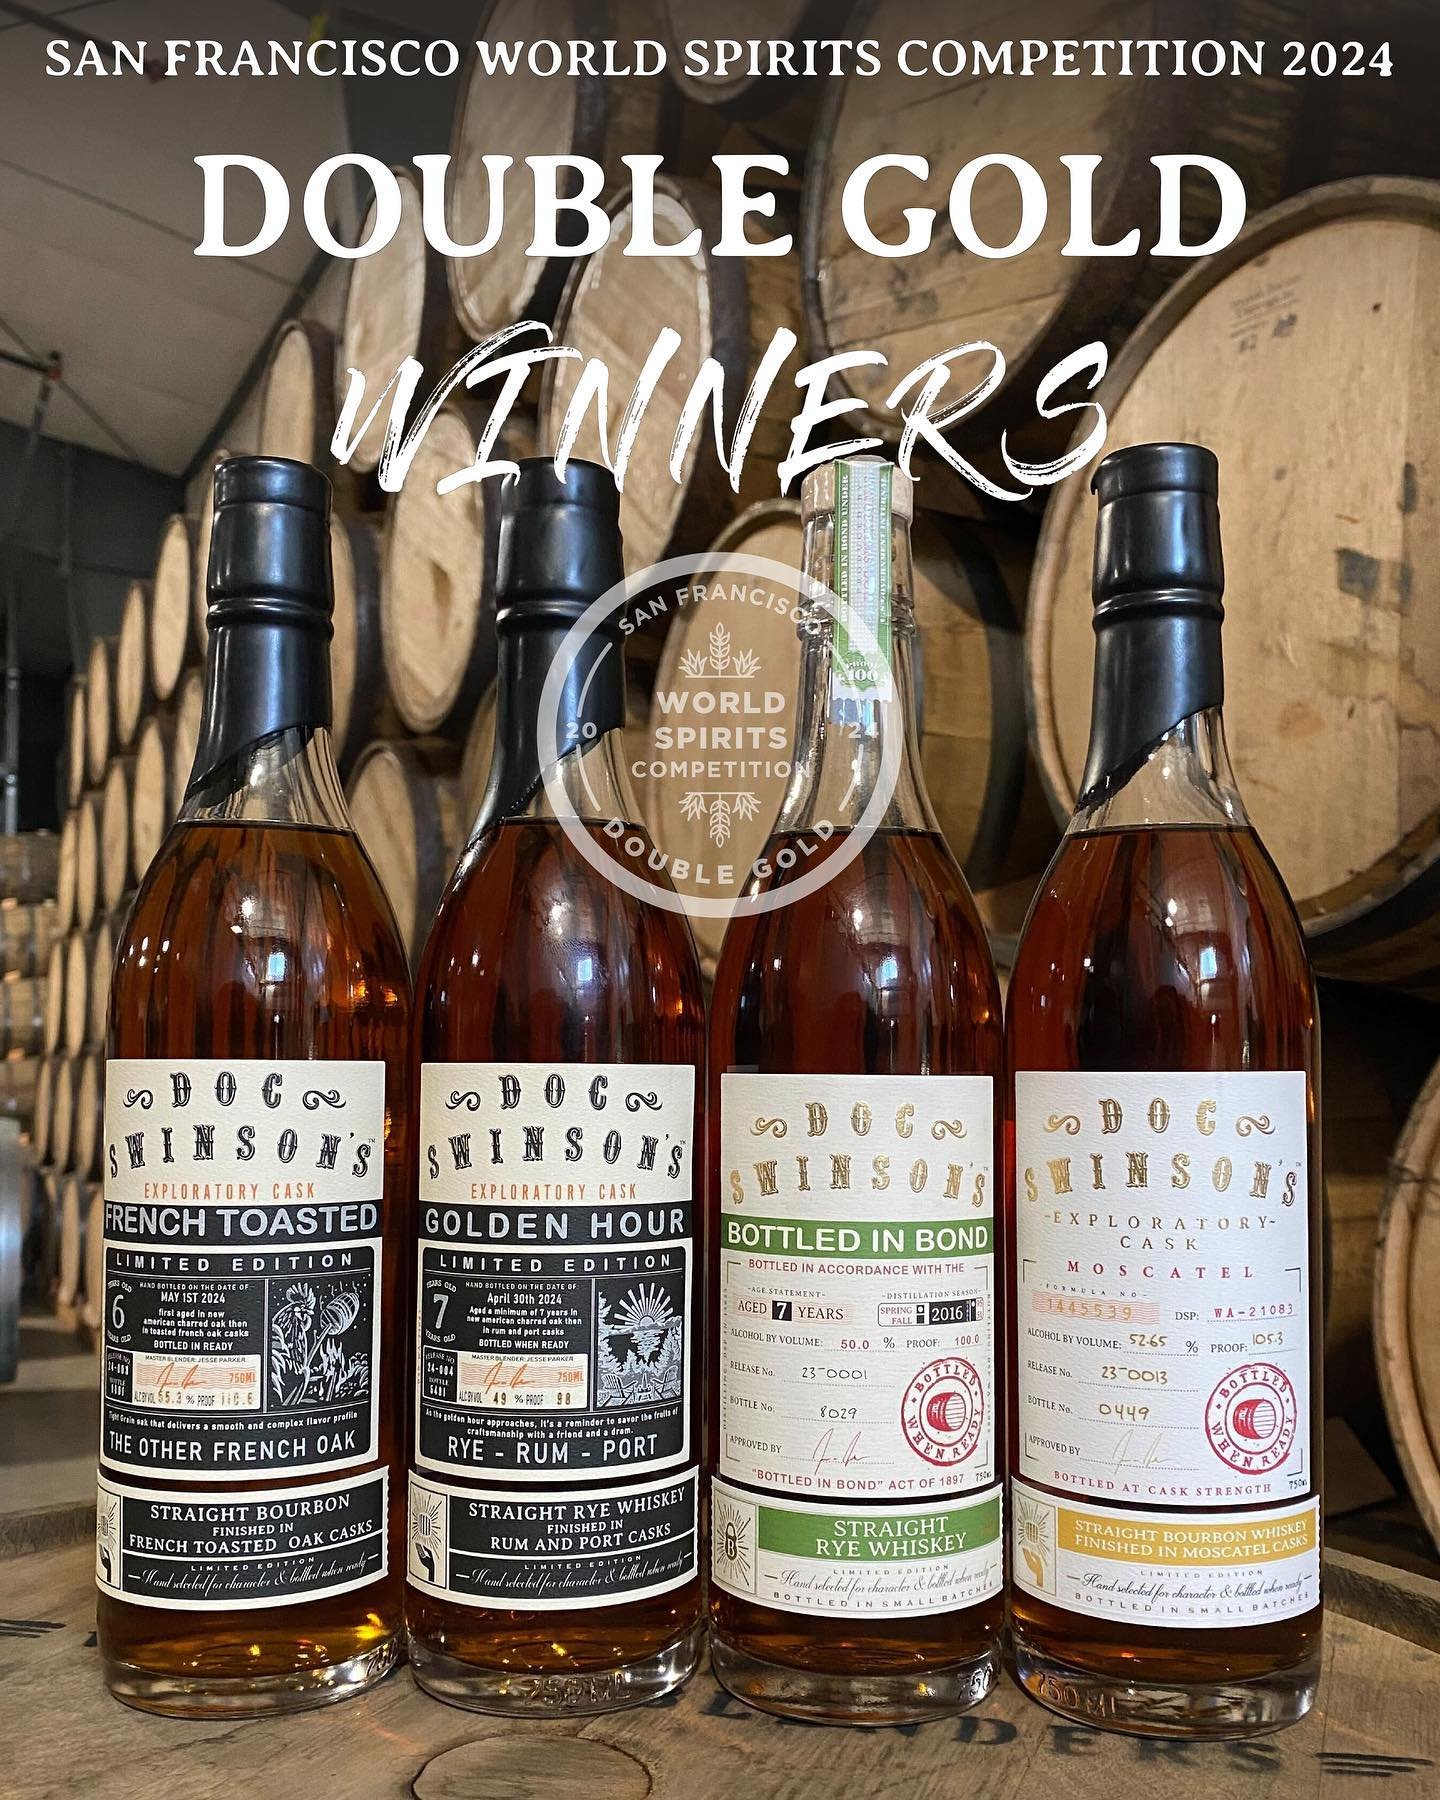 Award season is happening and we just received 4 double gold medals from San Francisco World Spirits Competition 🥇 🥇 🥇 🥇  We are very proud of what we do at Doc Swinson&rsquo;s let us know if you&rsquo;ve tried any of these and what you think!